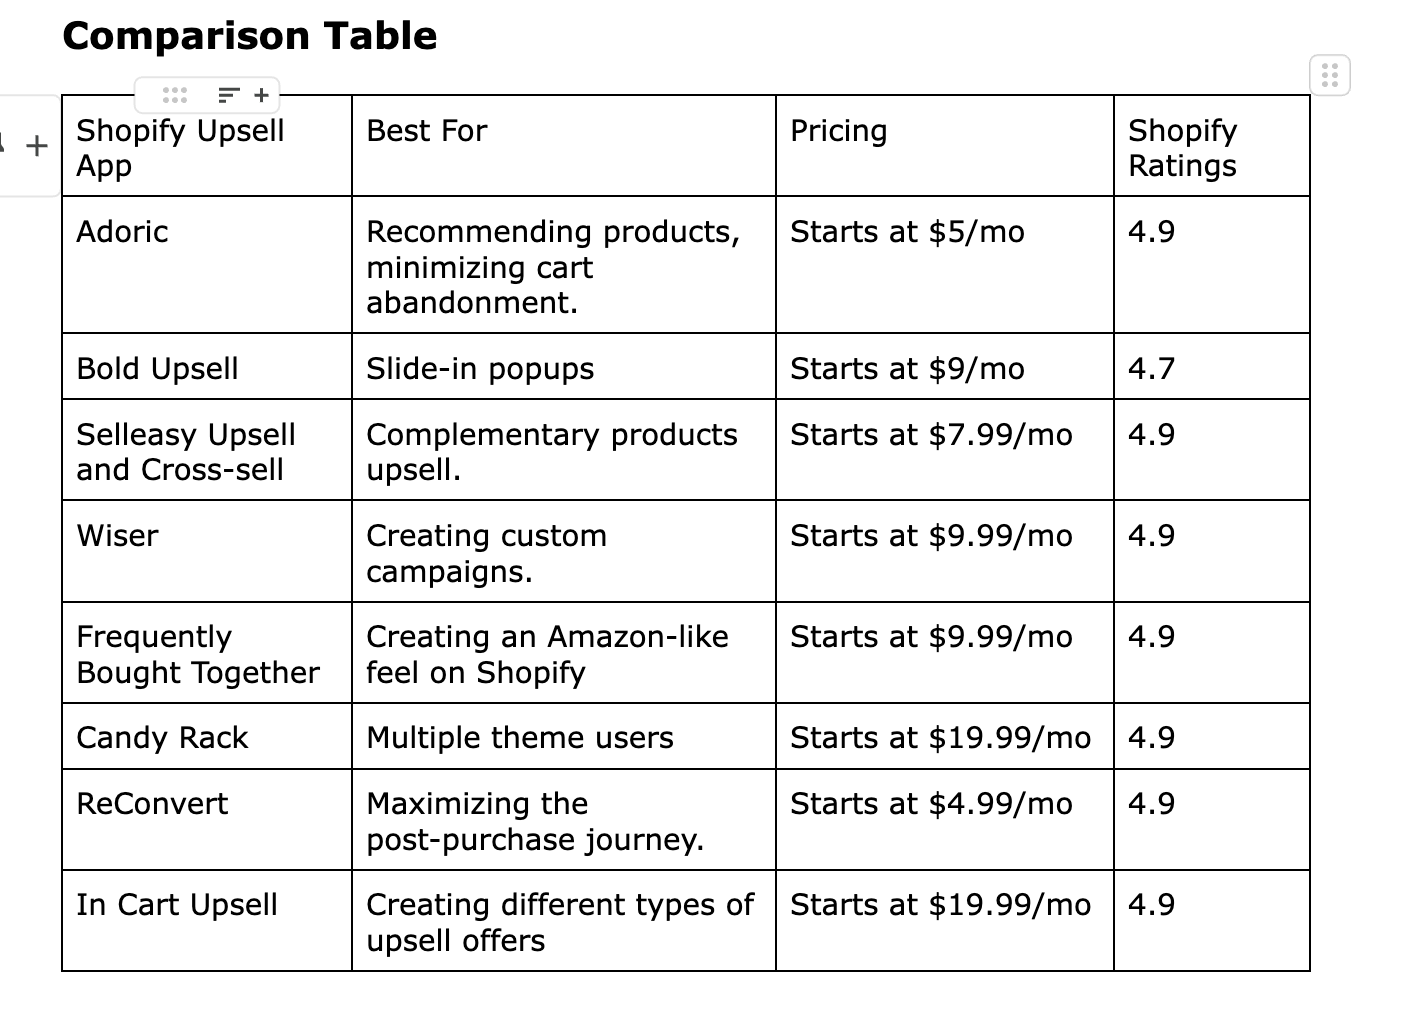 comparison of the best upsell apps.